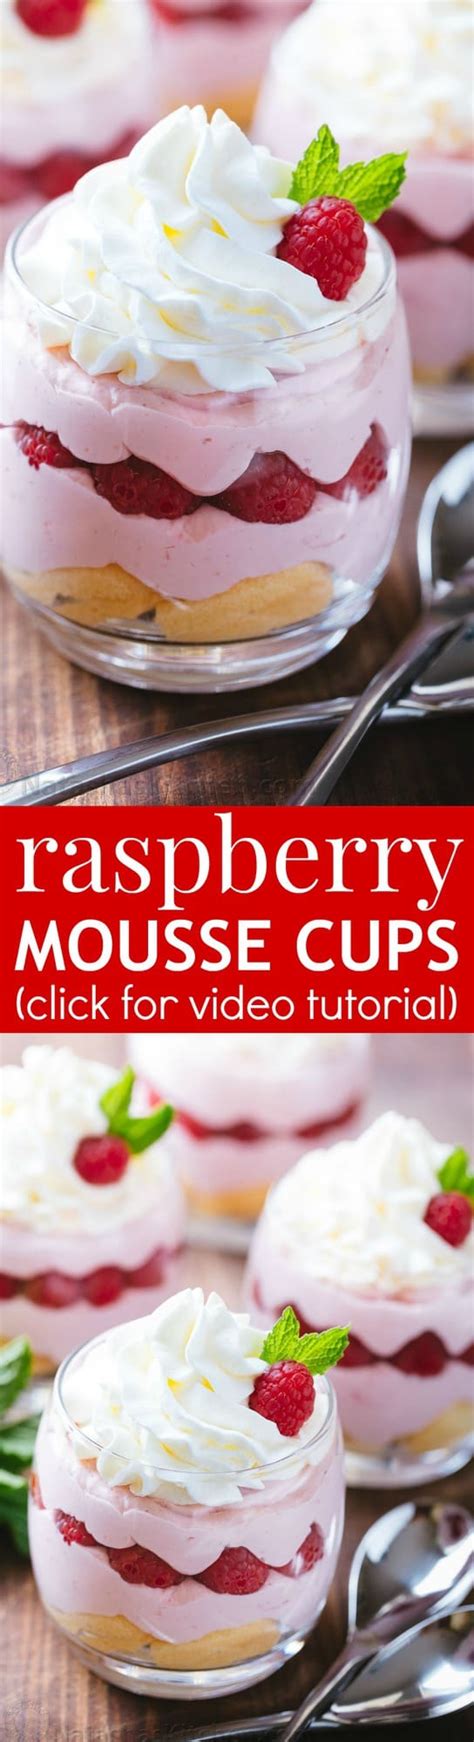 Perhaps that is what homemade lady fingers are supposed to taste like. Raspberry Mousse Cups (VIDEO Recipe) - NatashasKitchen.com